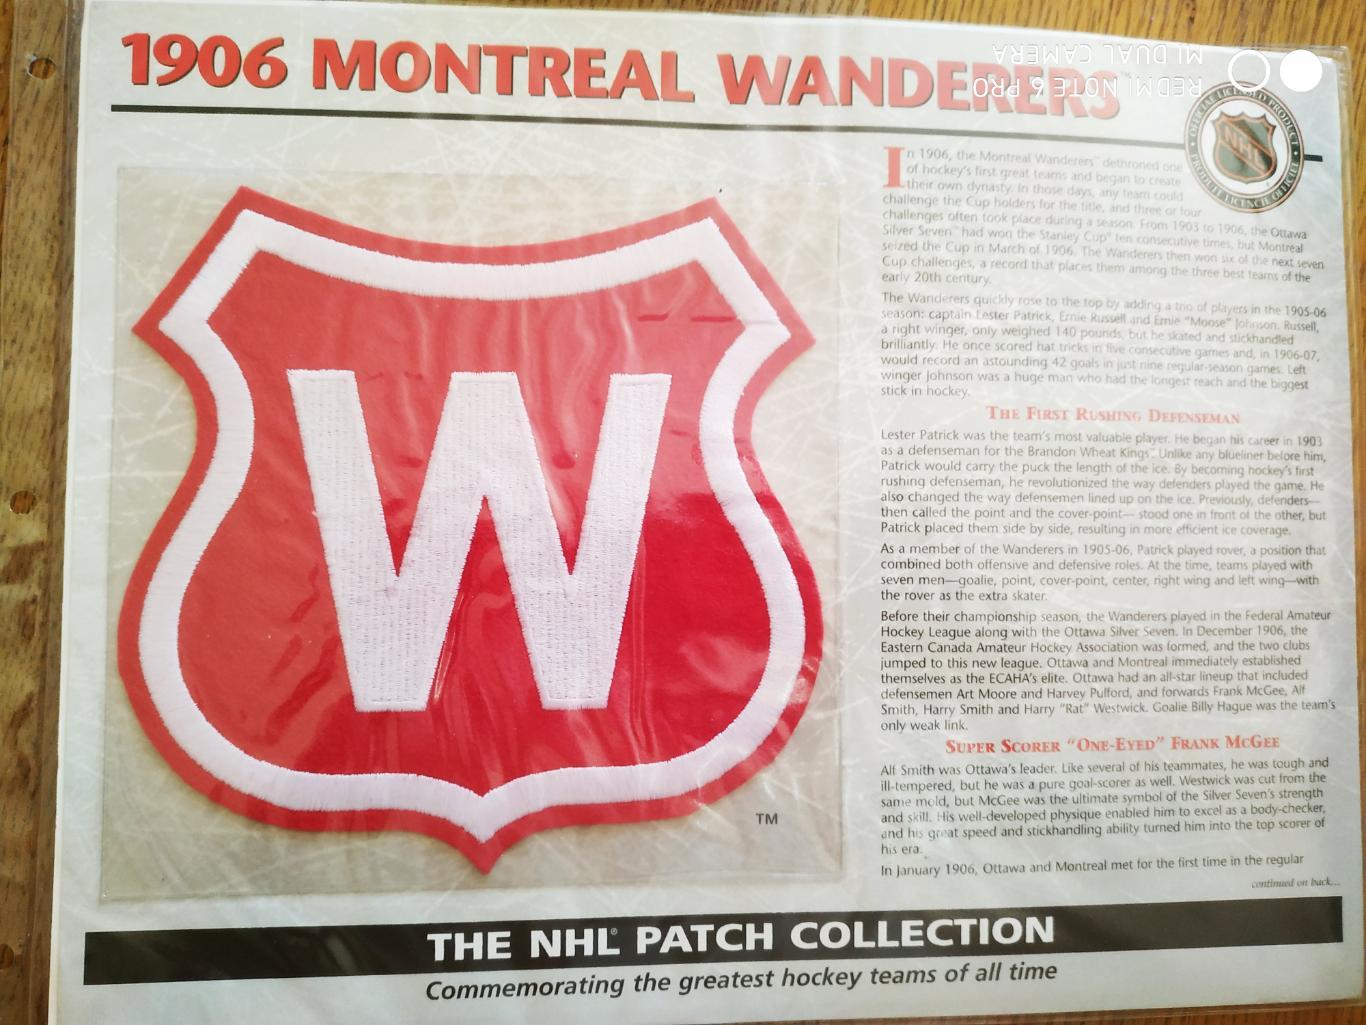 1906 MONTREAL WANDERERS THE NHL PATCH COLLECTION WILLABEE WARD